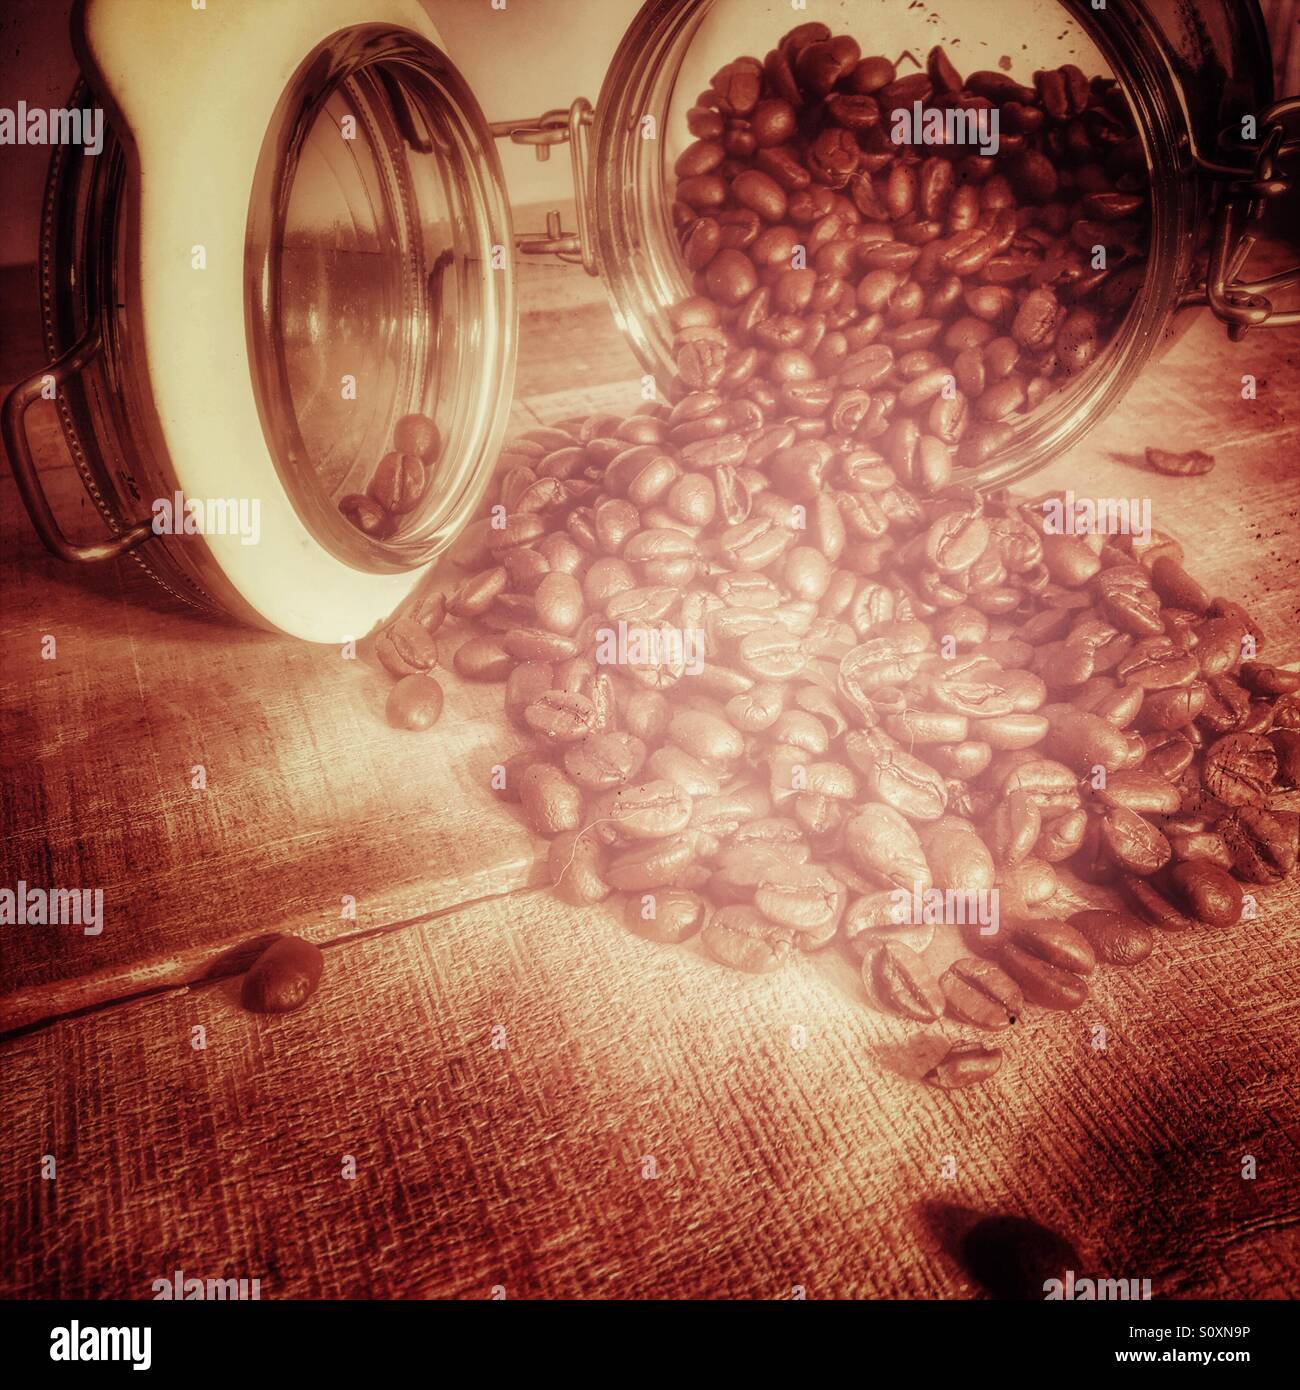 Fresh roasted arabica coffee beans pouring from a glass Kilner type coffee jar. Stock Photo